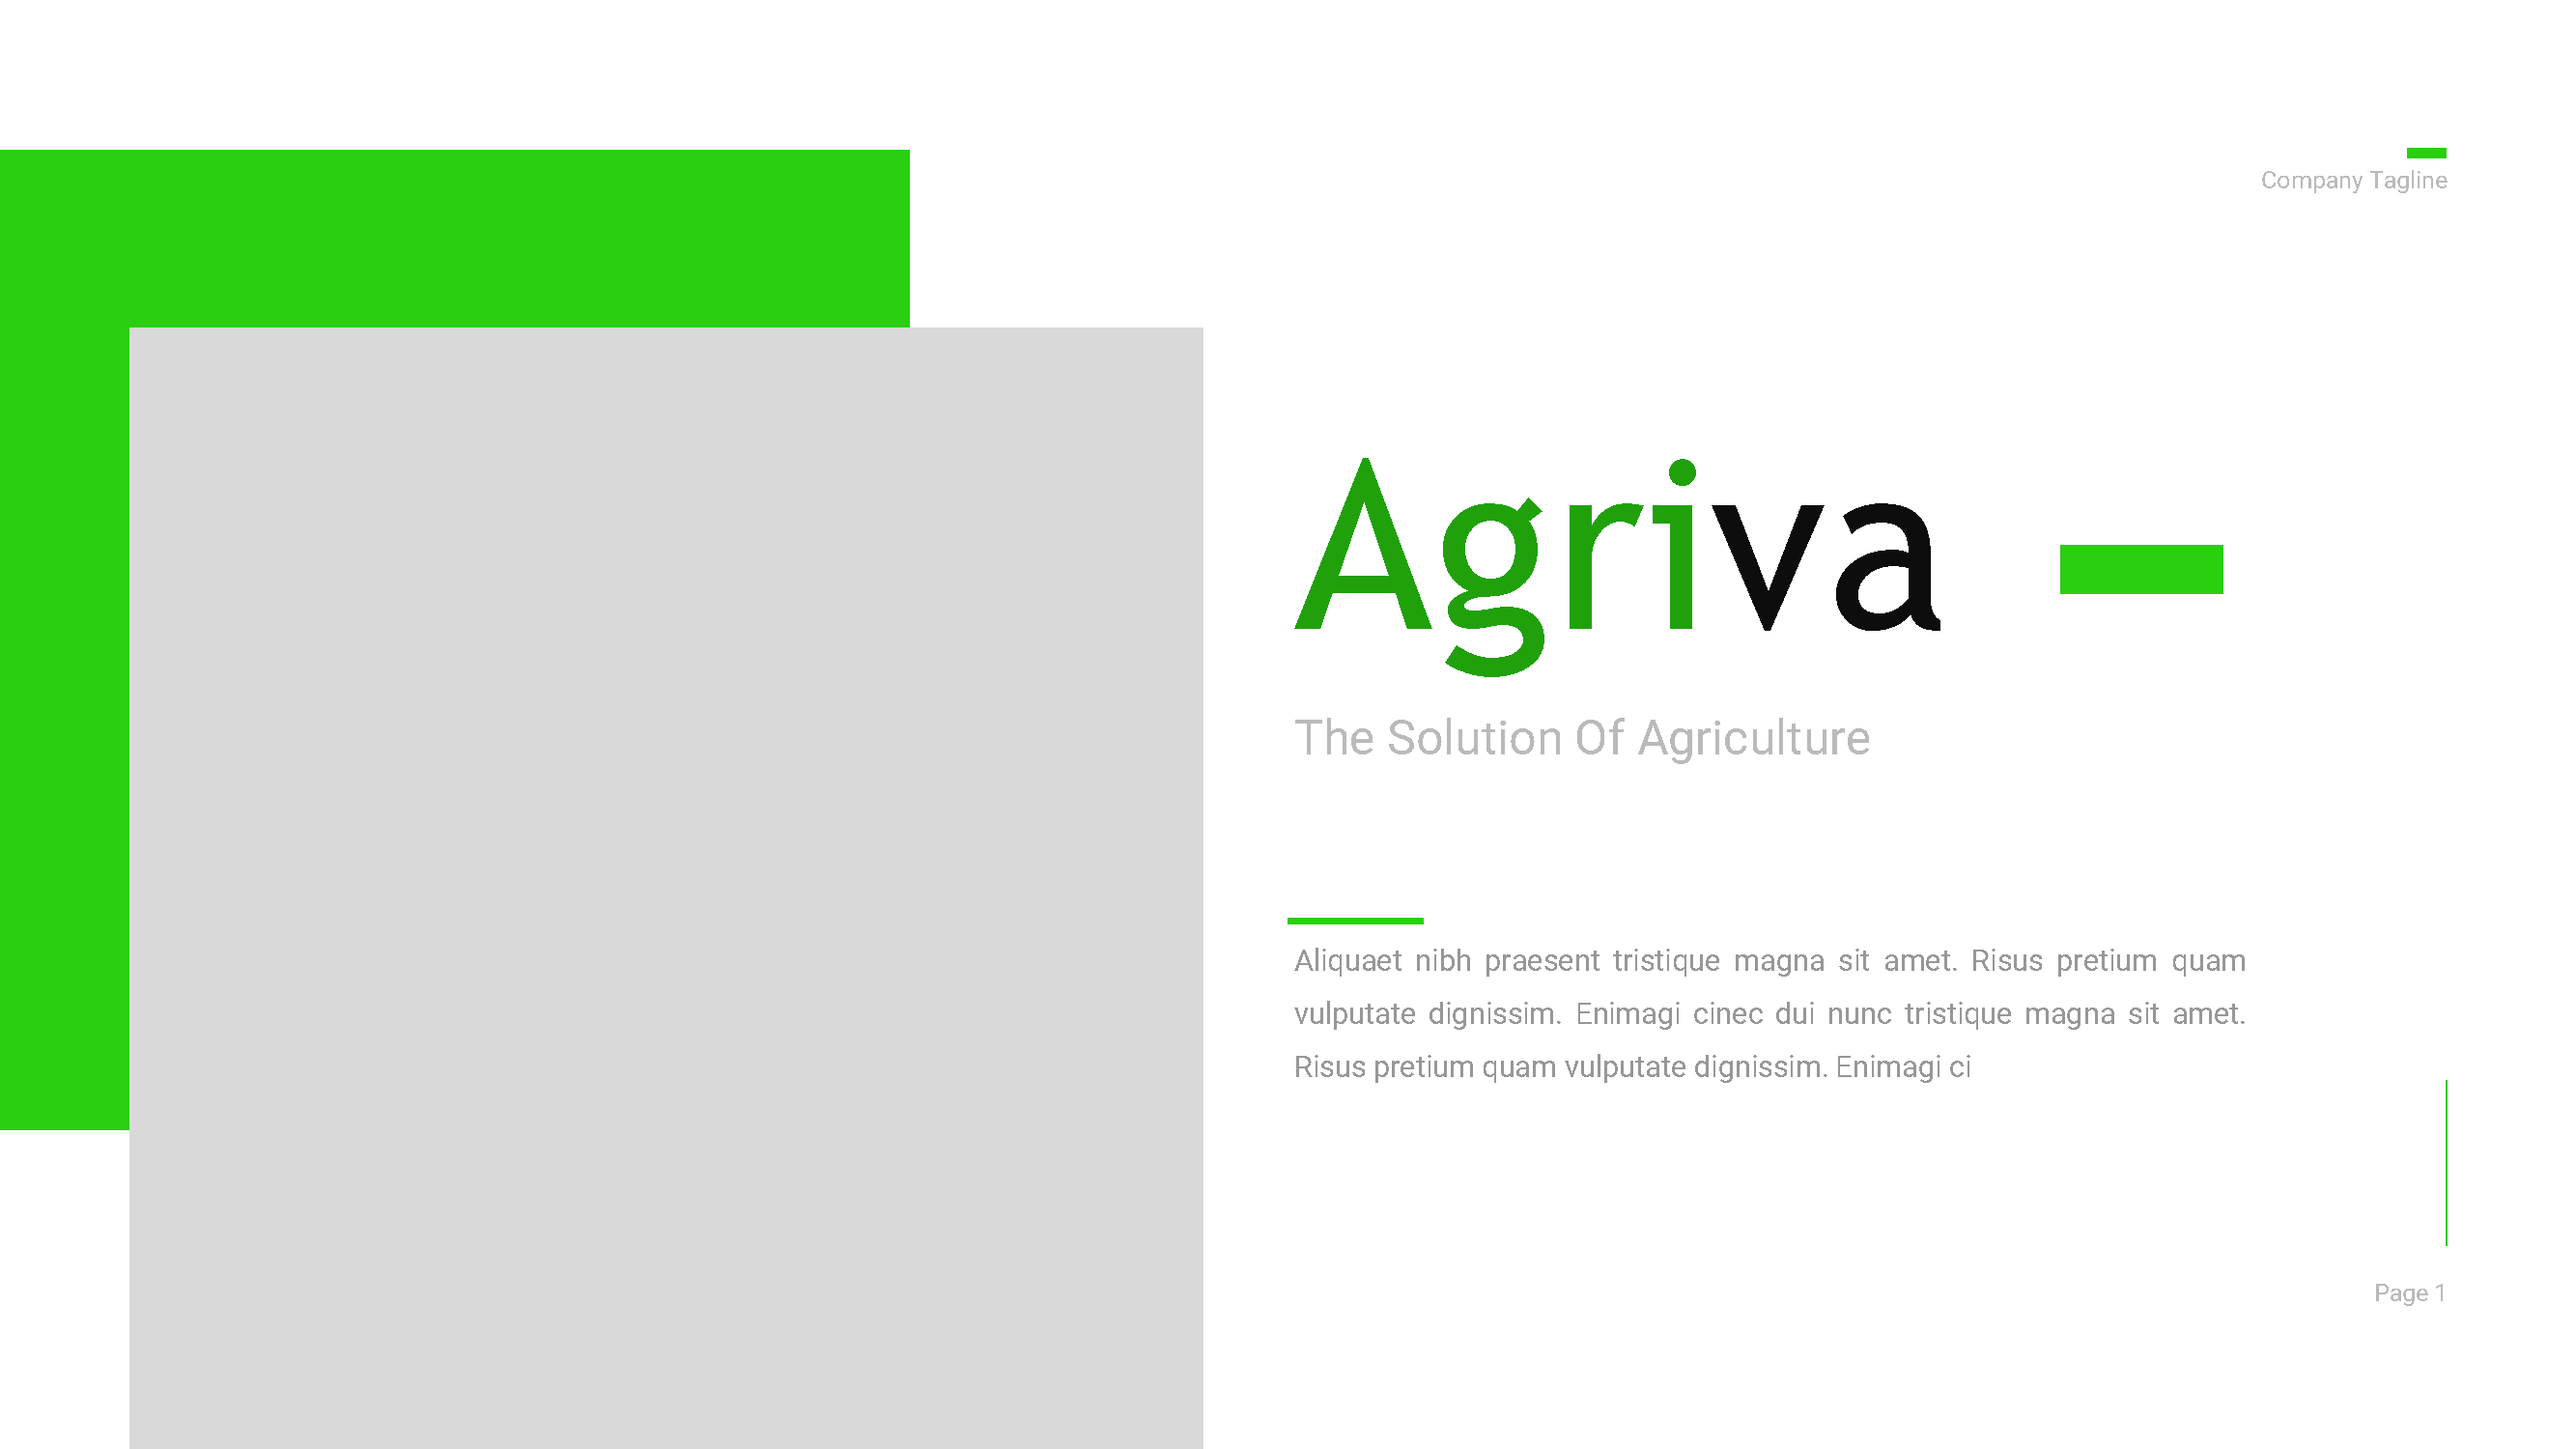 agriva-agriculture-powerpoint-template-QRZ5Q78